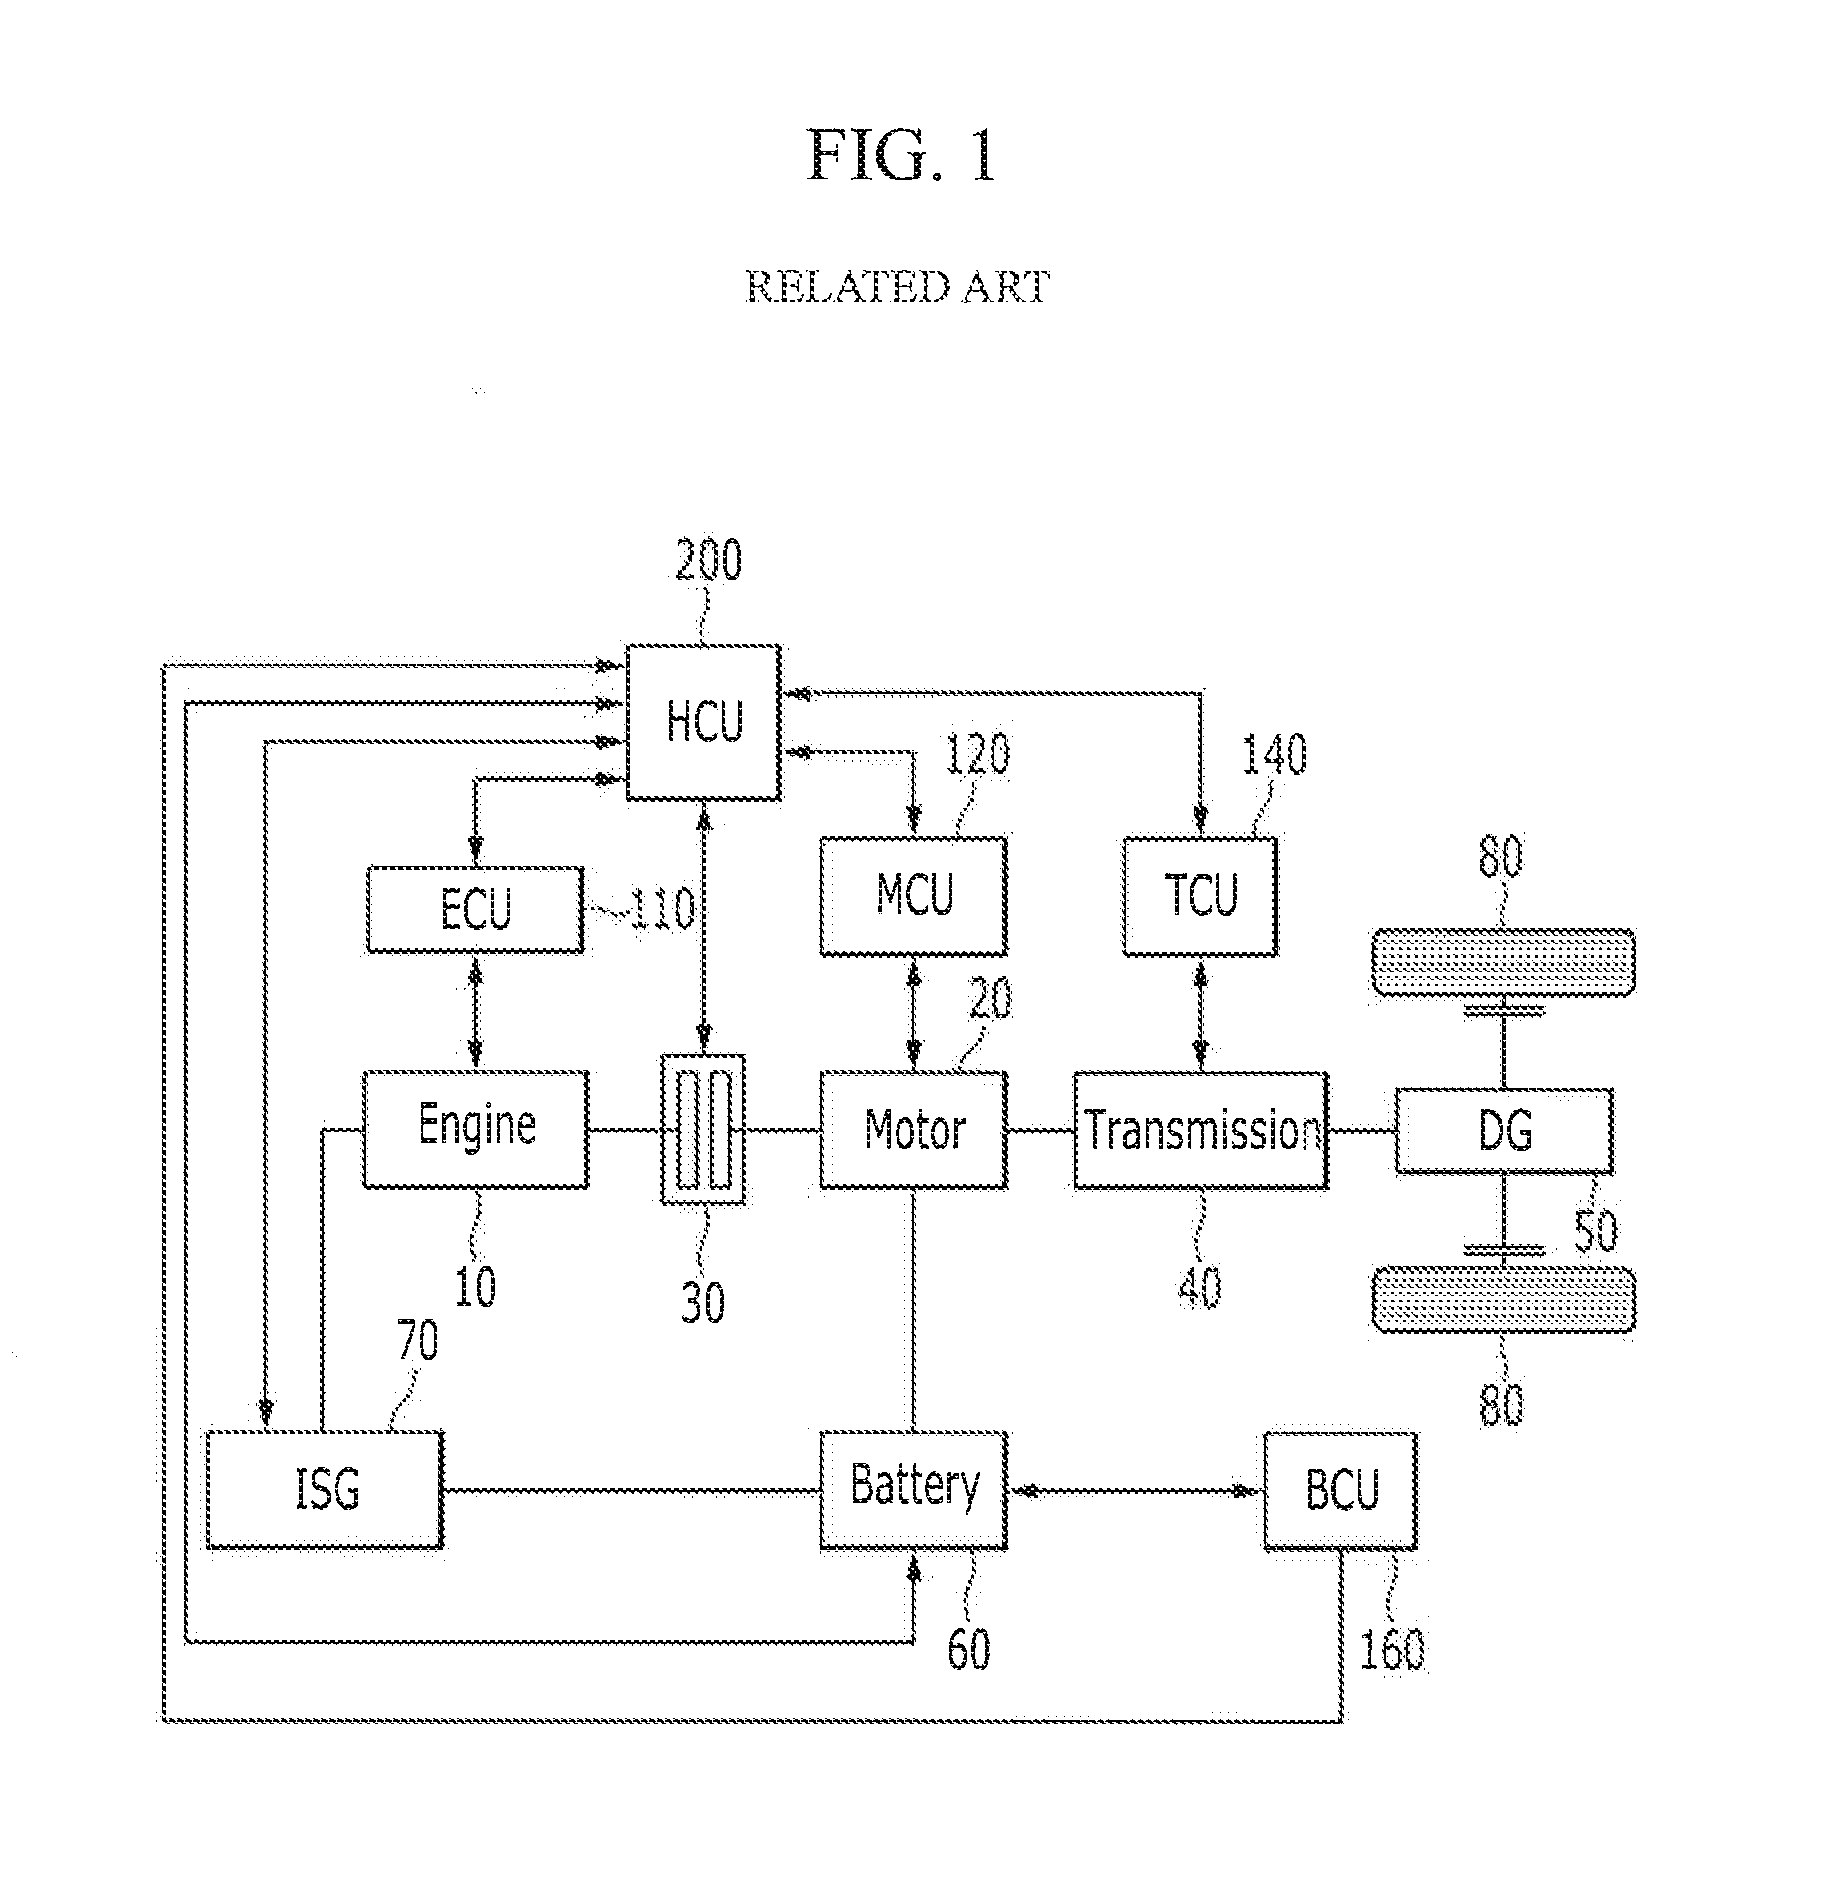 Method and system for displaying efficiency of regenerative braking for environmentally-friendly vehicle